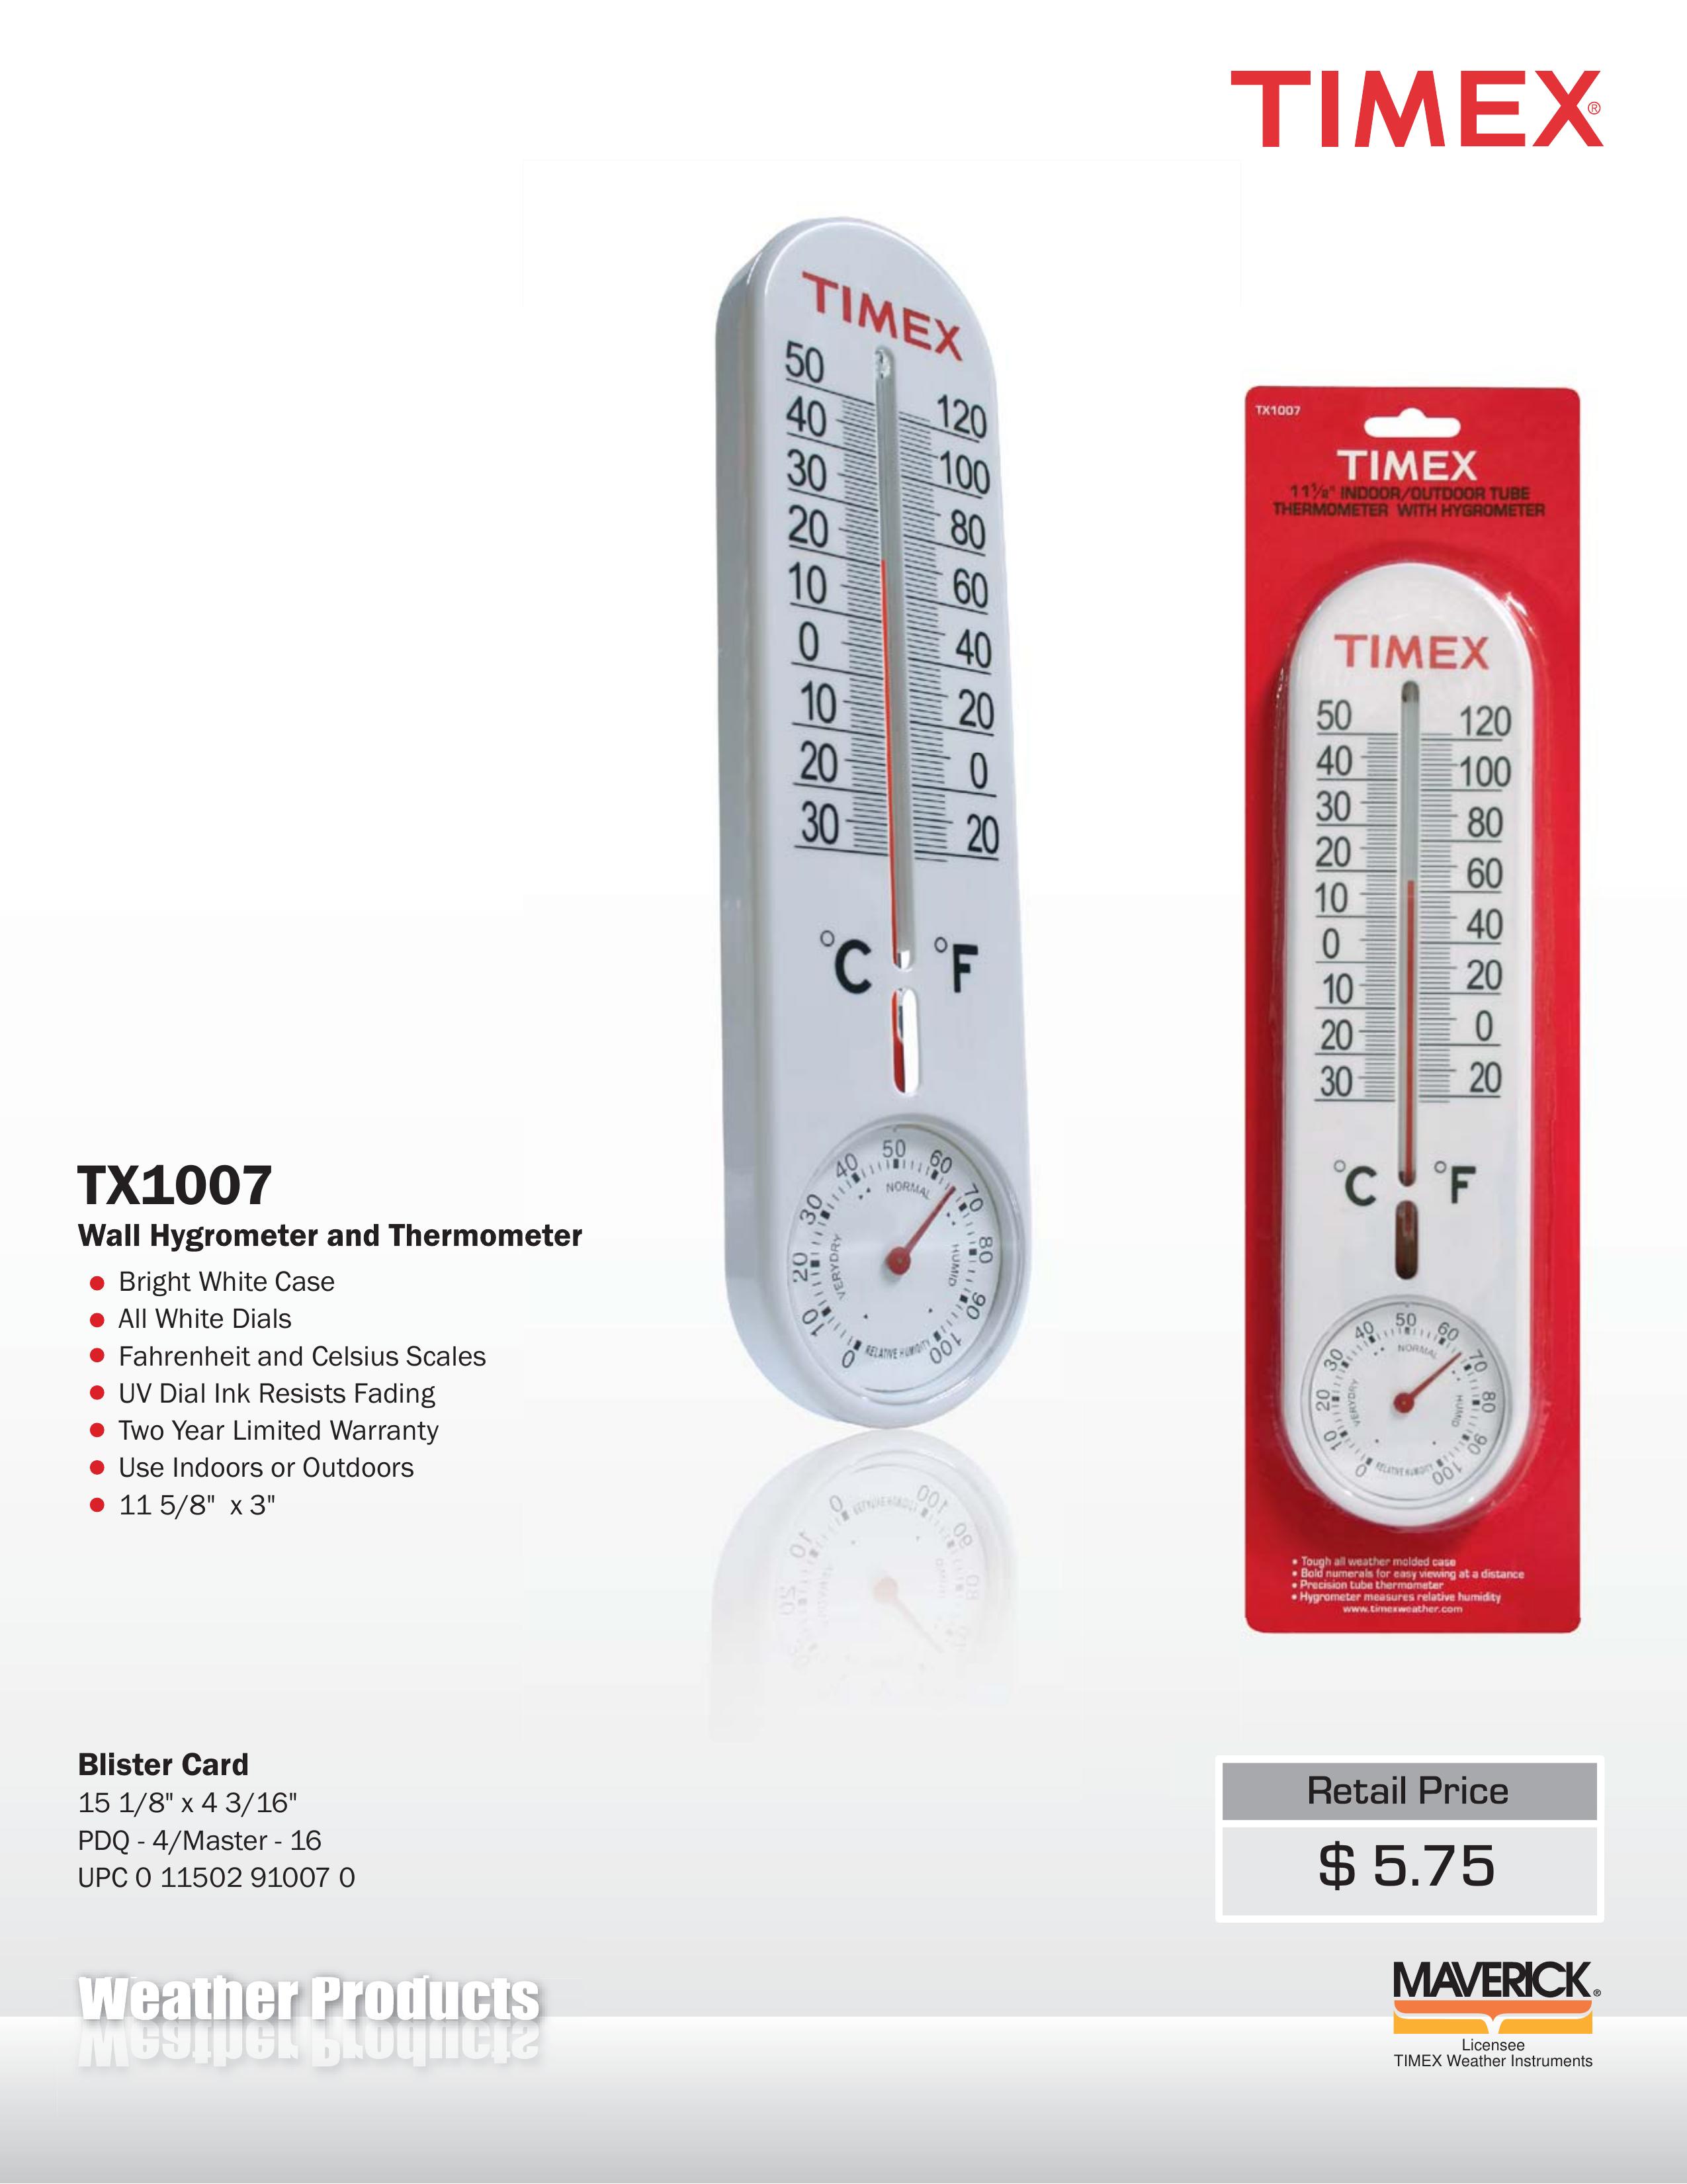 TIMEX Weather Products TX1007 Thermometer User Manual